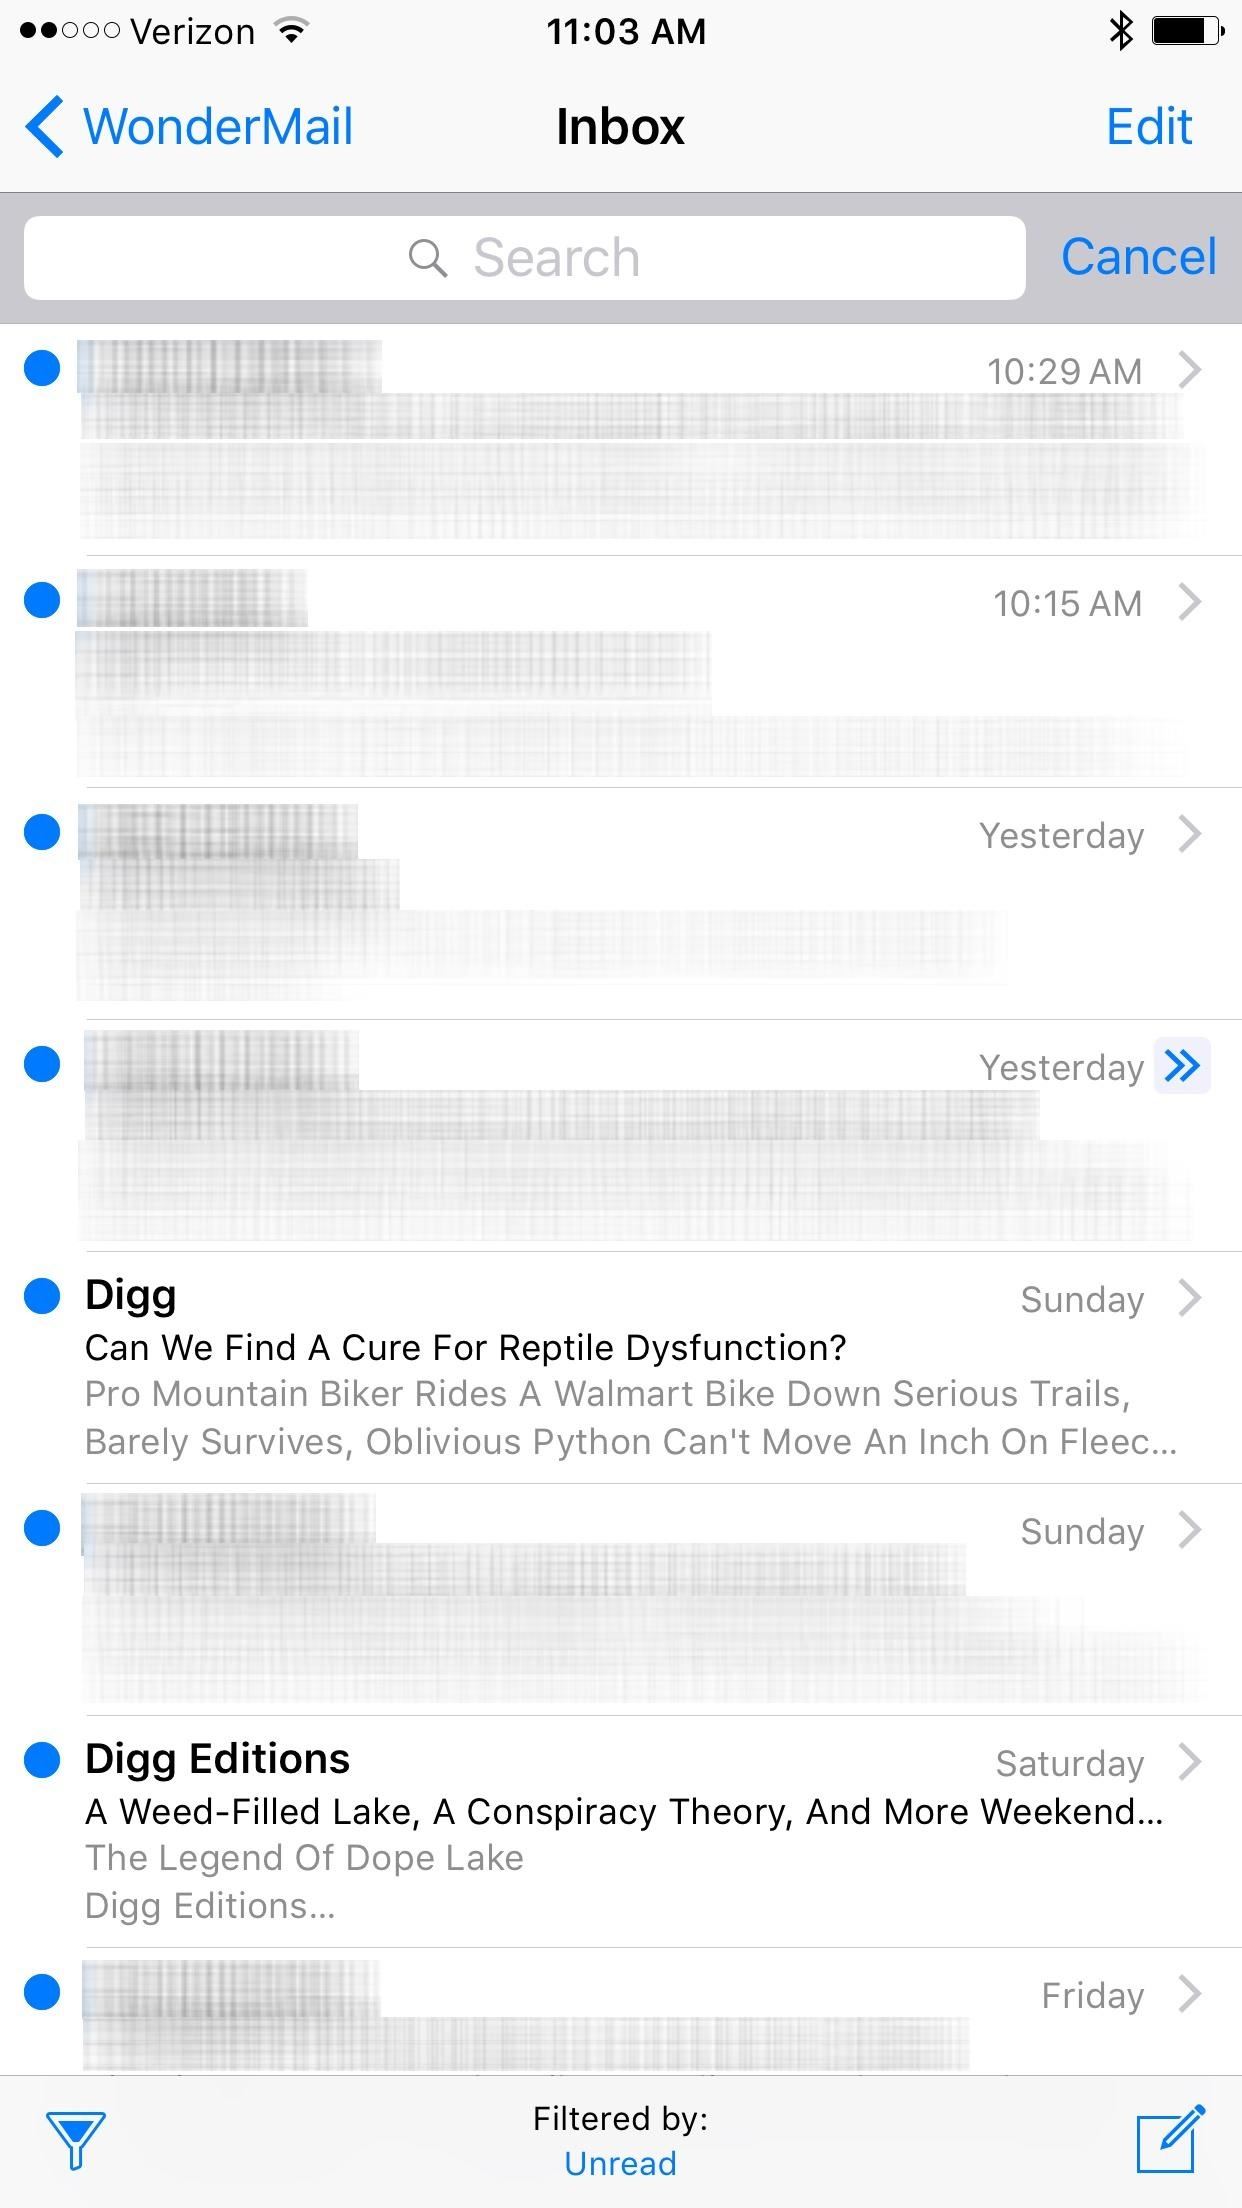 See Only Emails with Attachments Using This Secret iPhone Mail Trick